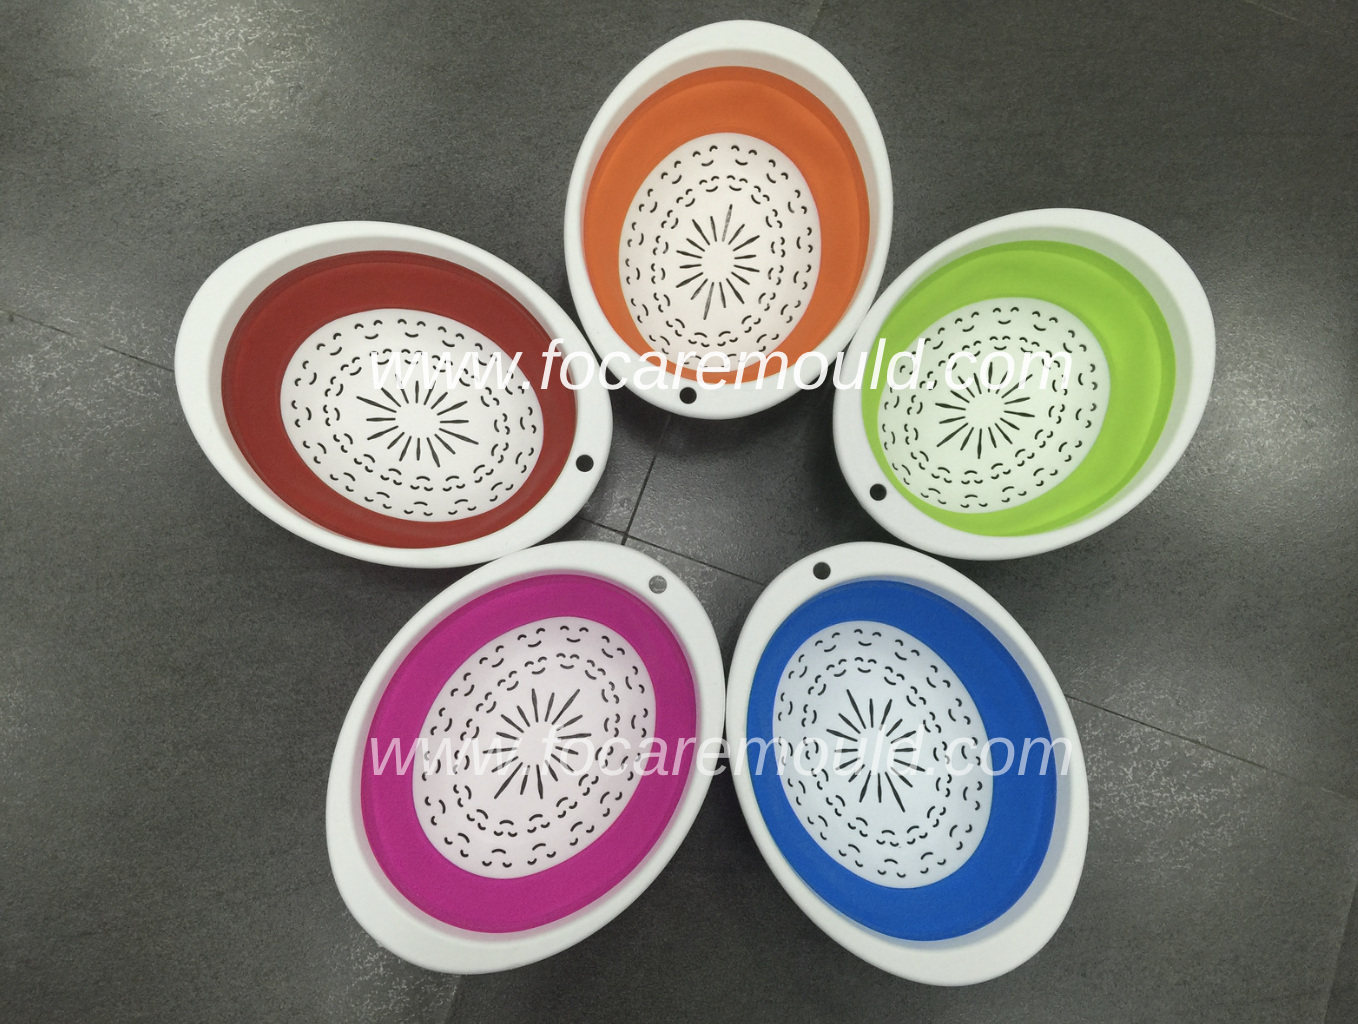 High quality Two-color Plastic Collapsible Strainer Injection Mold Quotes,China Two-color Plastic Collapsible Strainer Injection Mold Factory,Two-color Plastic Collapsible Strainer Injection Mold Purchasing